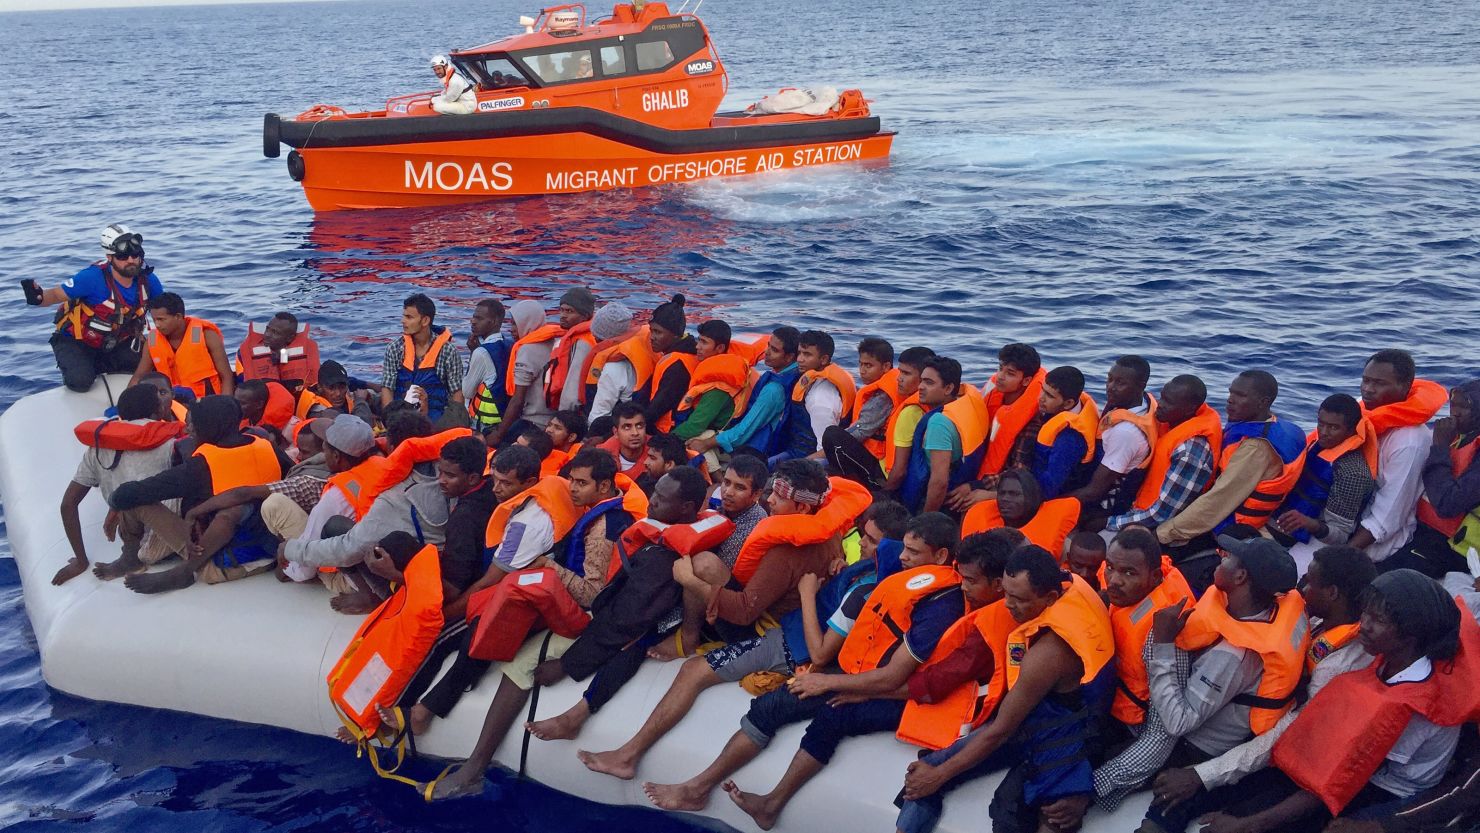 MOAS crews use a smaller boat to rescue migrants before bringing them on board the Topaz Responder.